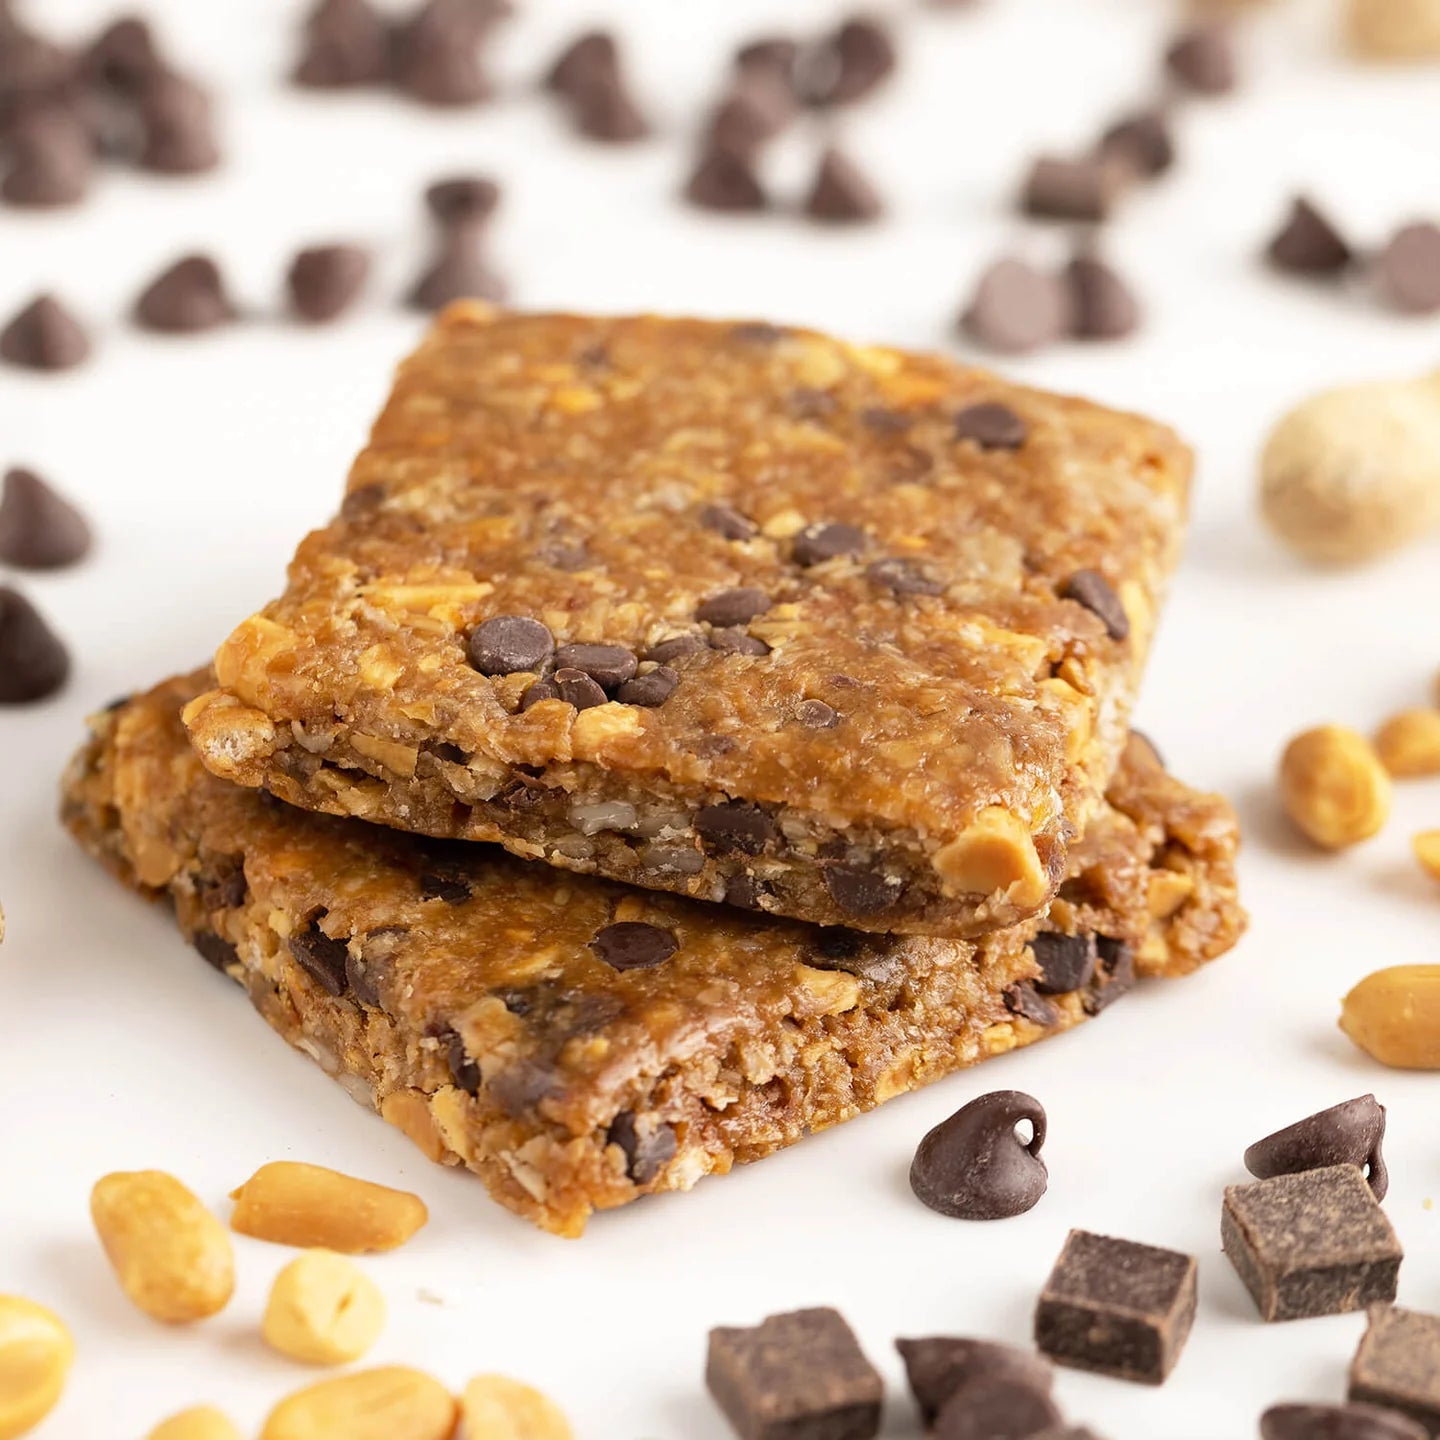 ProBar Meal - Peanut Butter Chocolate Chip SALE!